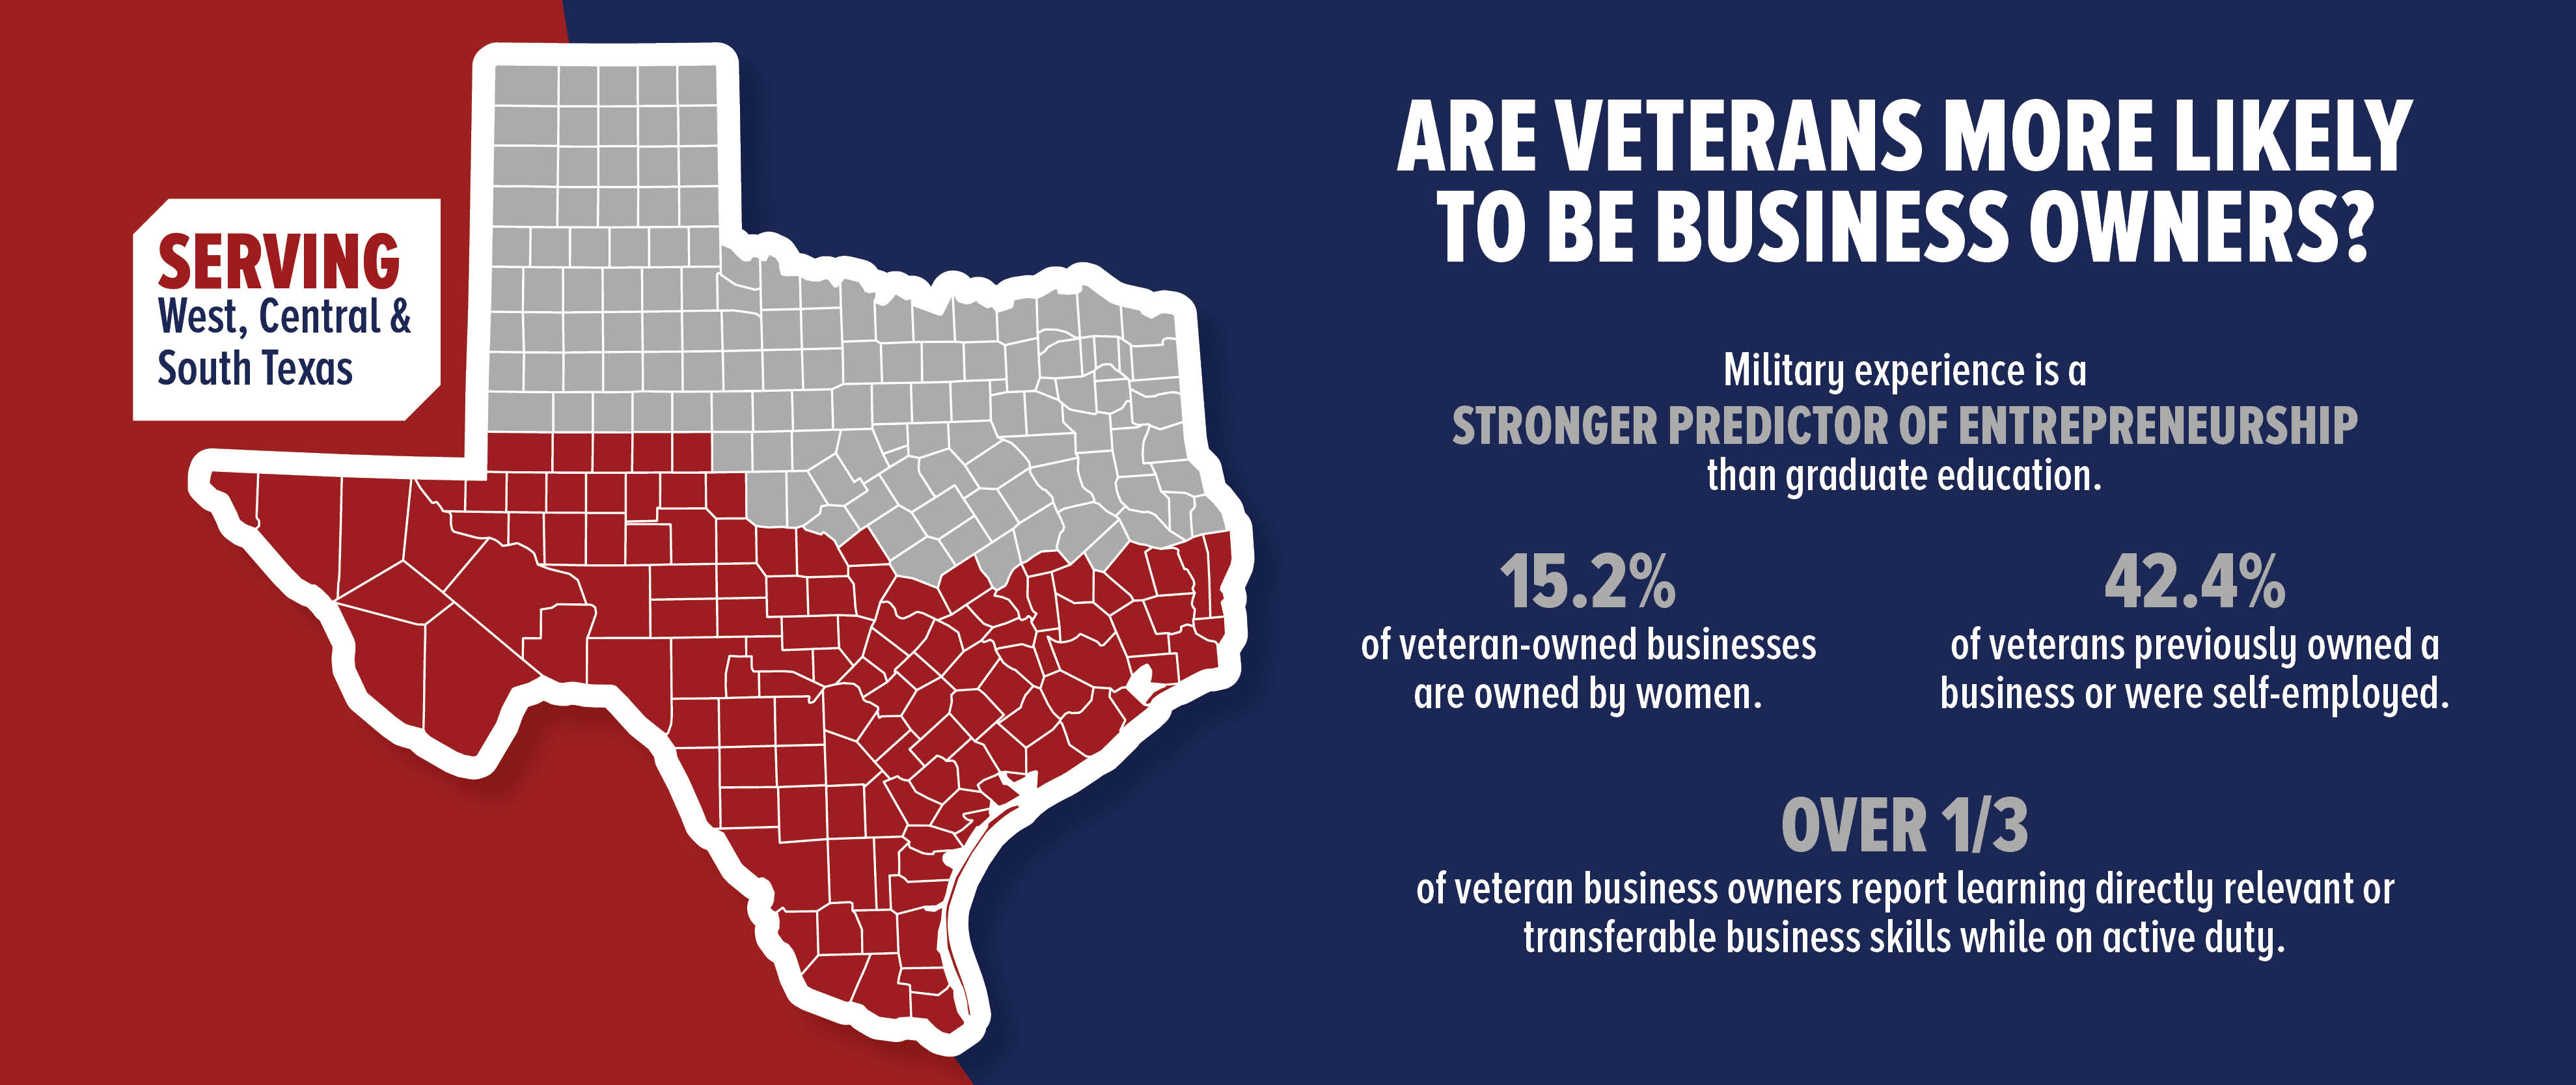 Are Veterans More Likely to be business owners? Military experience is a stronger predictor of entrepreneurship than graduate education. 15.2% of veteran owned business are owned by women. 42.4% if veterans previous owned a business or were self-employed. Over one-third of veteran business owners report learning directly relevant or transferable business skills while on active day.